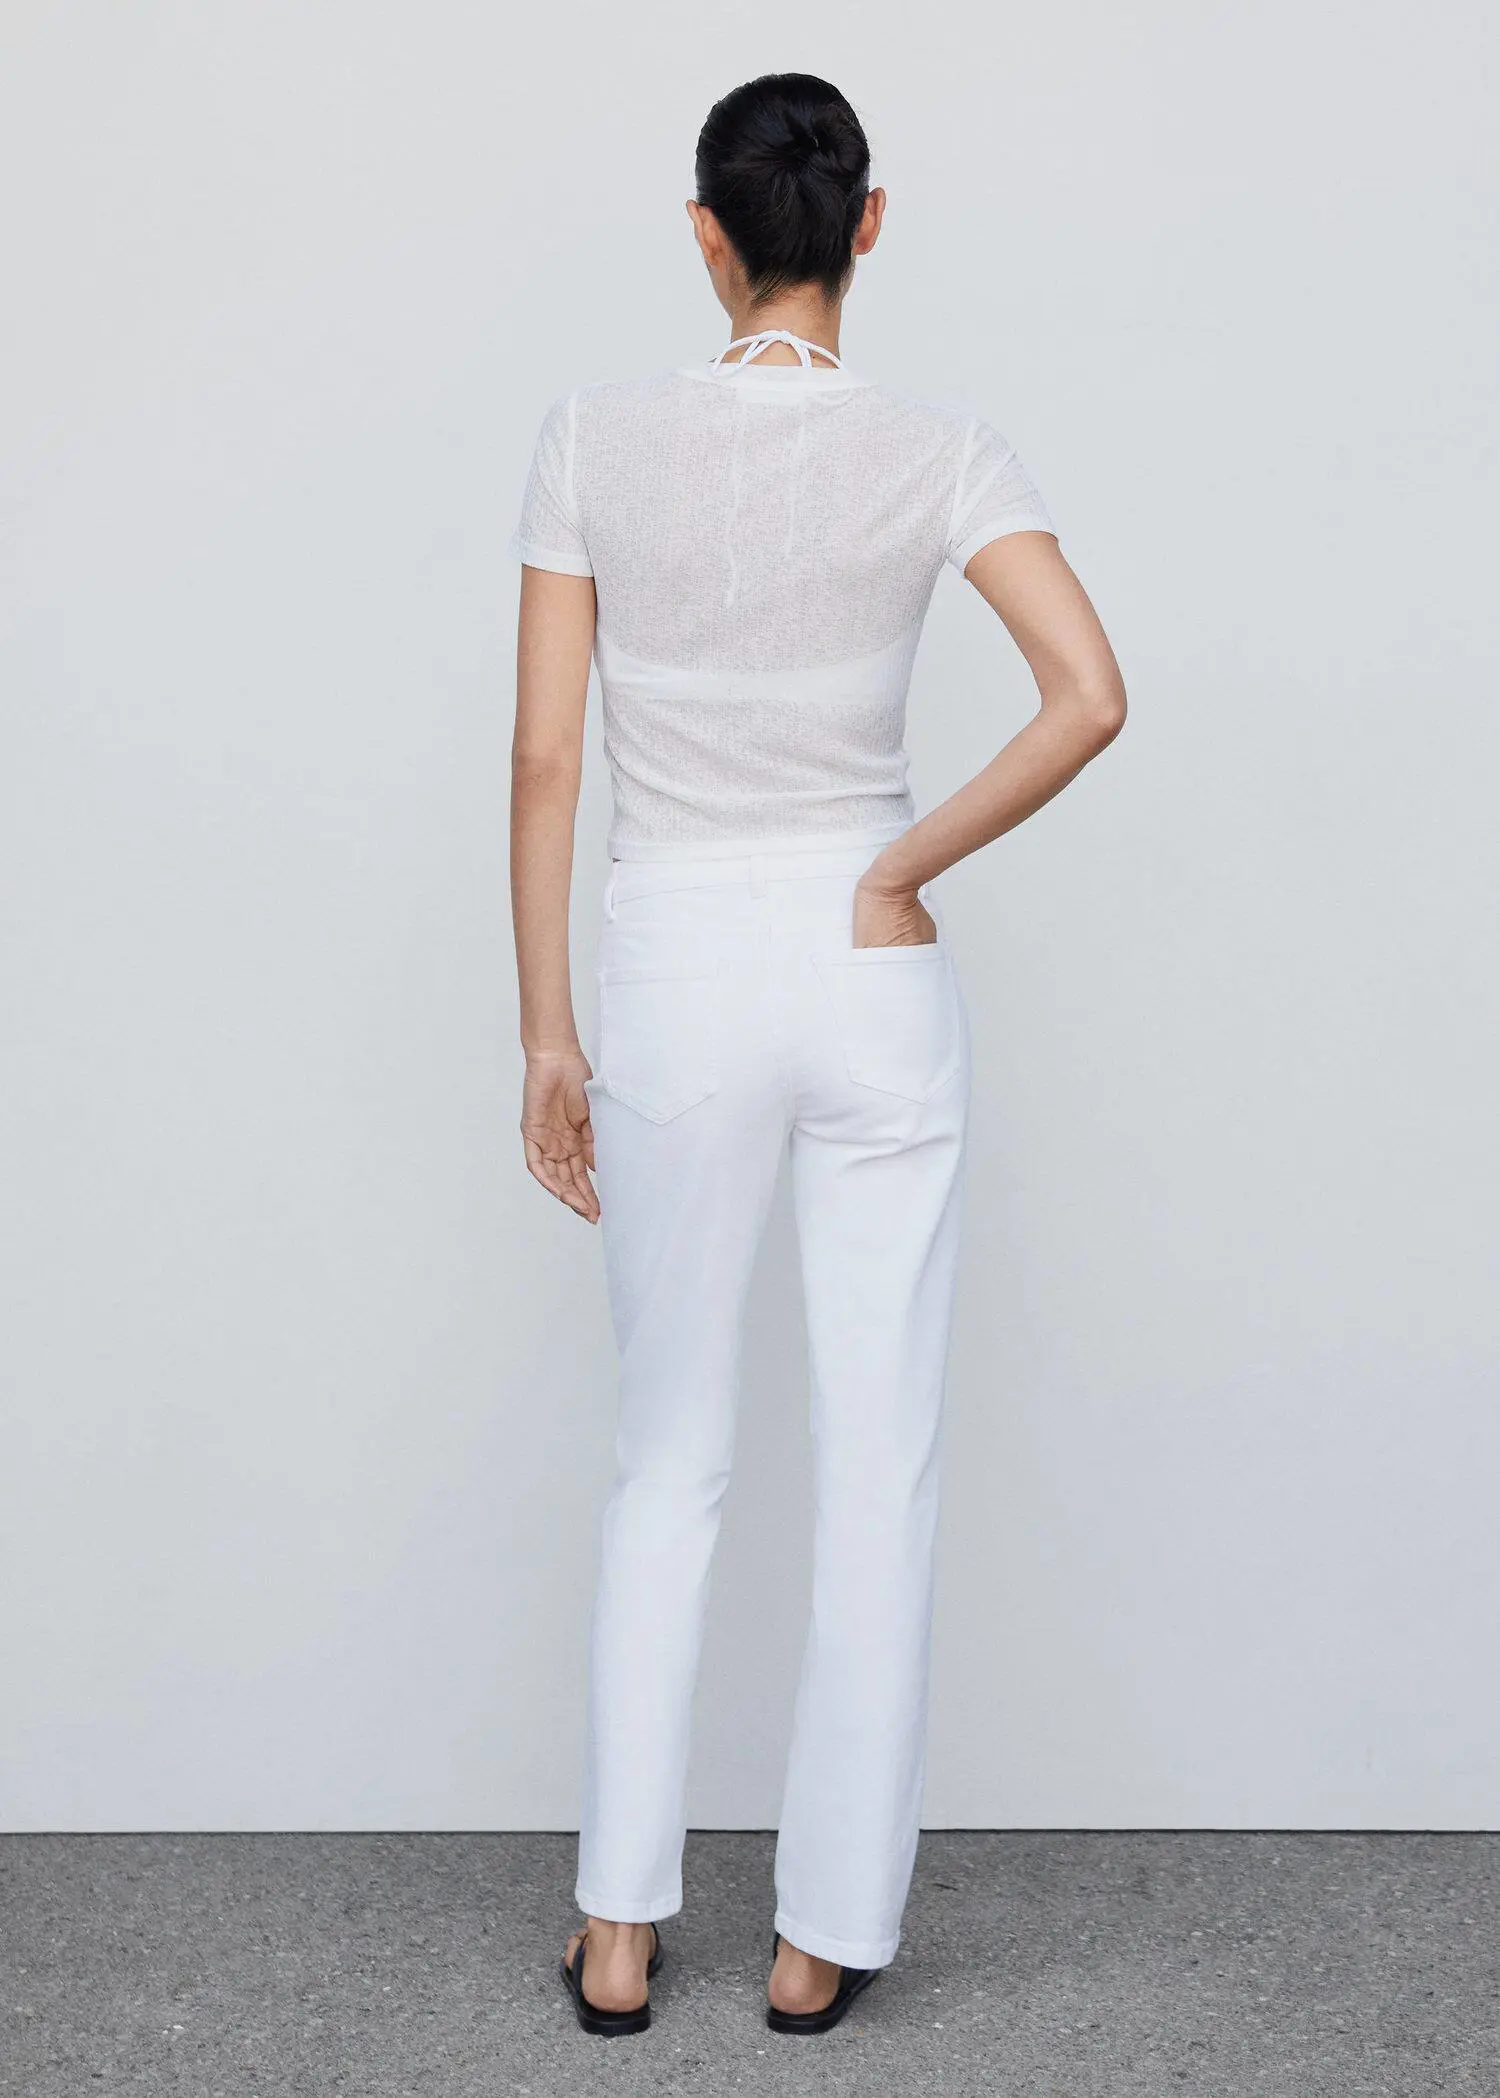 Mango Medium-comfort straight jeans. a woman wearing all white standing in front of a white wall. 